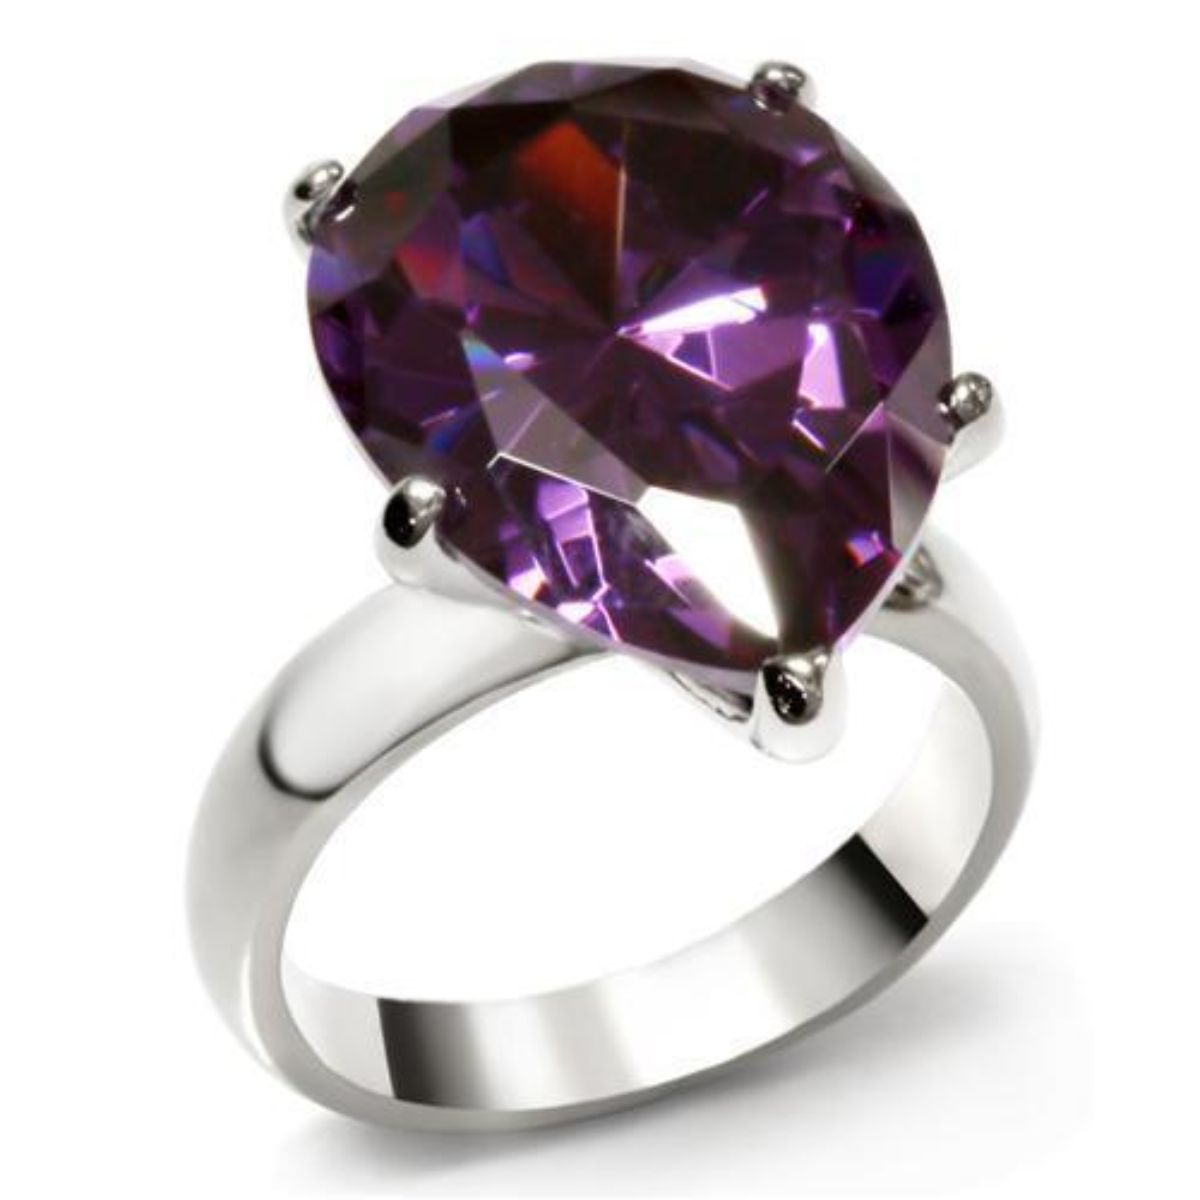 Luxe Jewelry Designs Women's Stainless Steel Engagement Ring with Cubic Zirconia Amethyst - Size 10